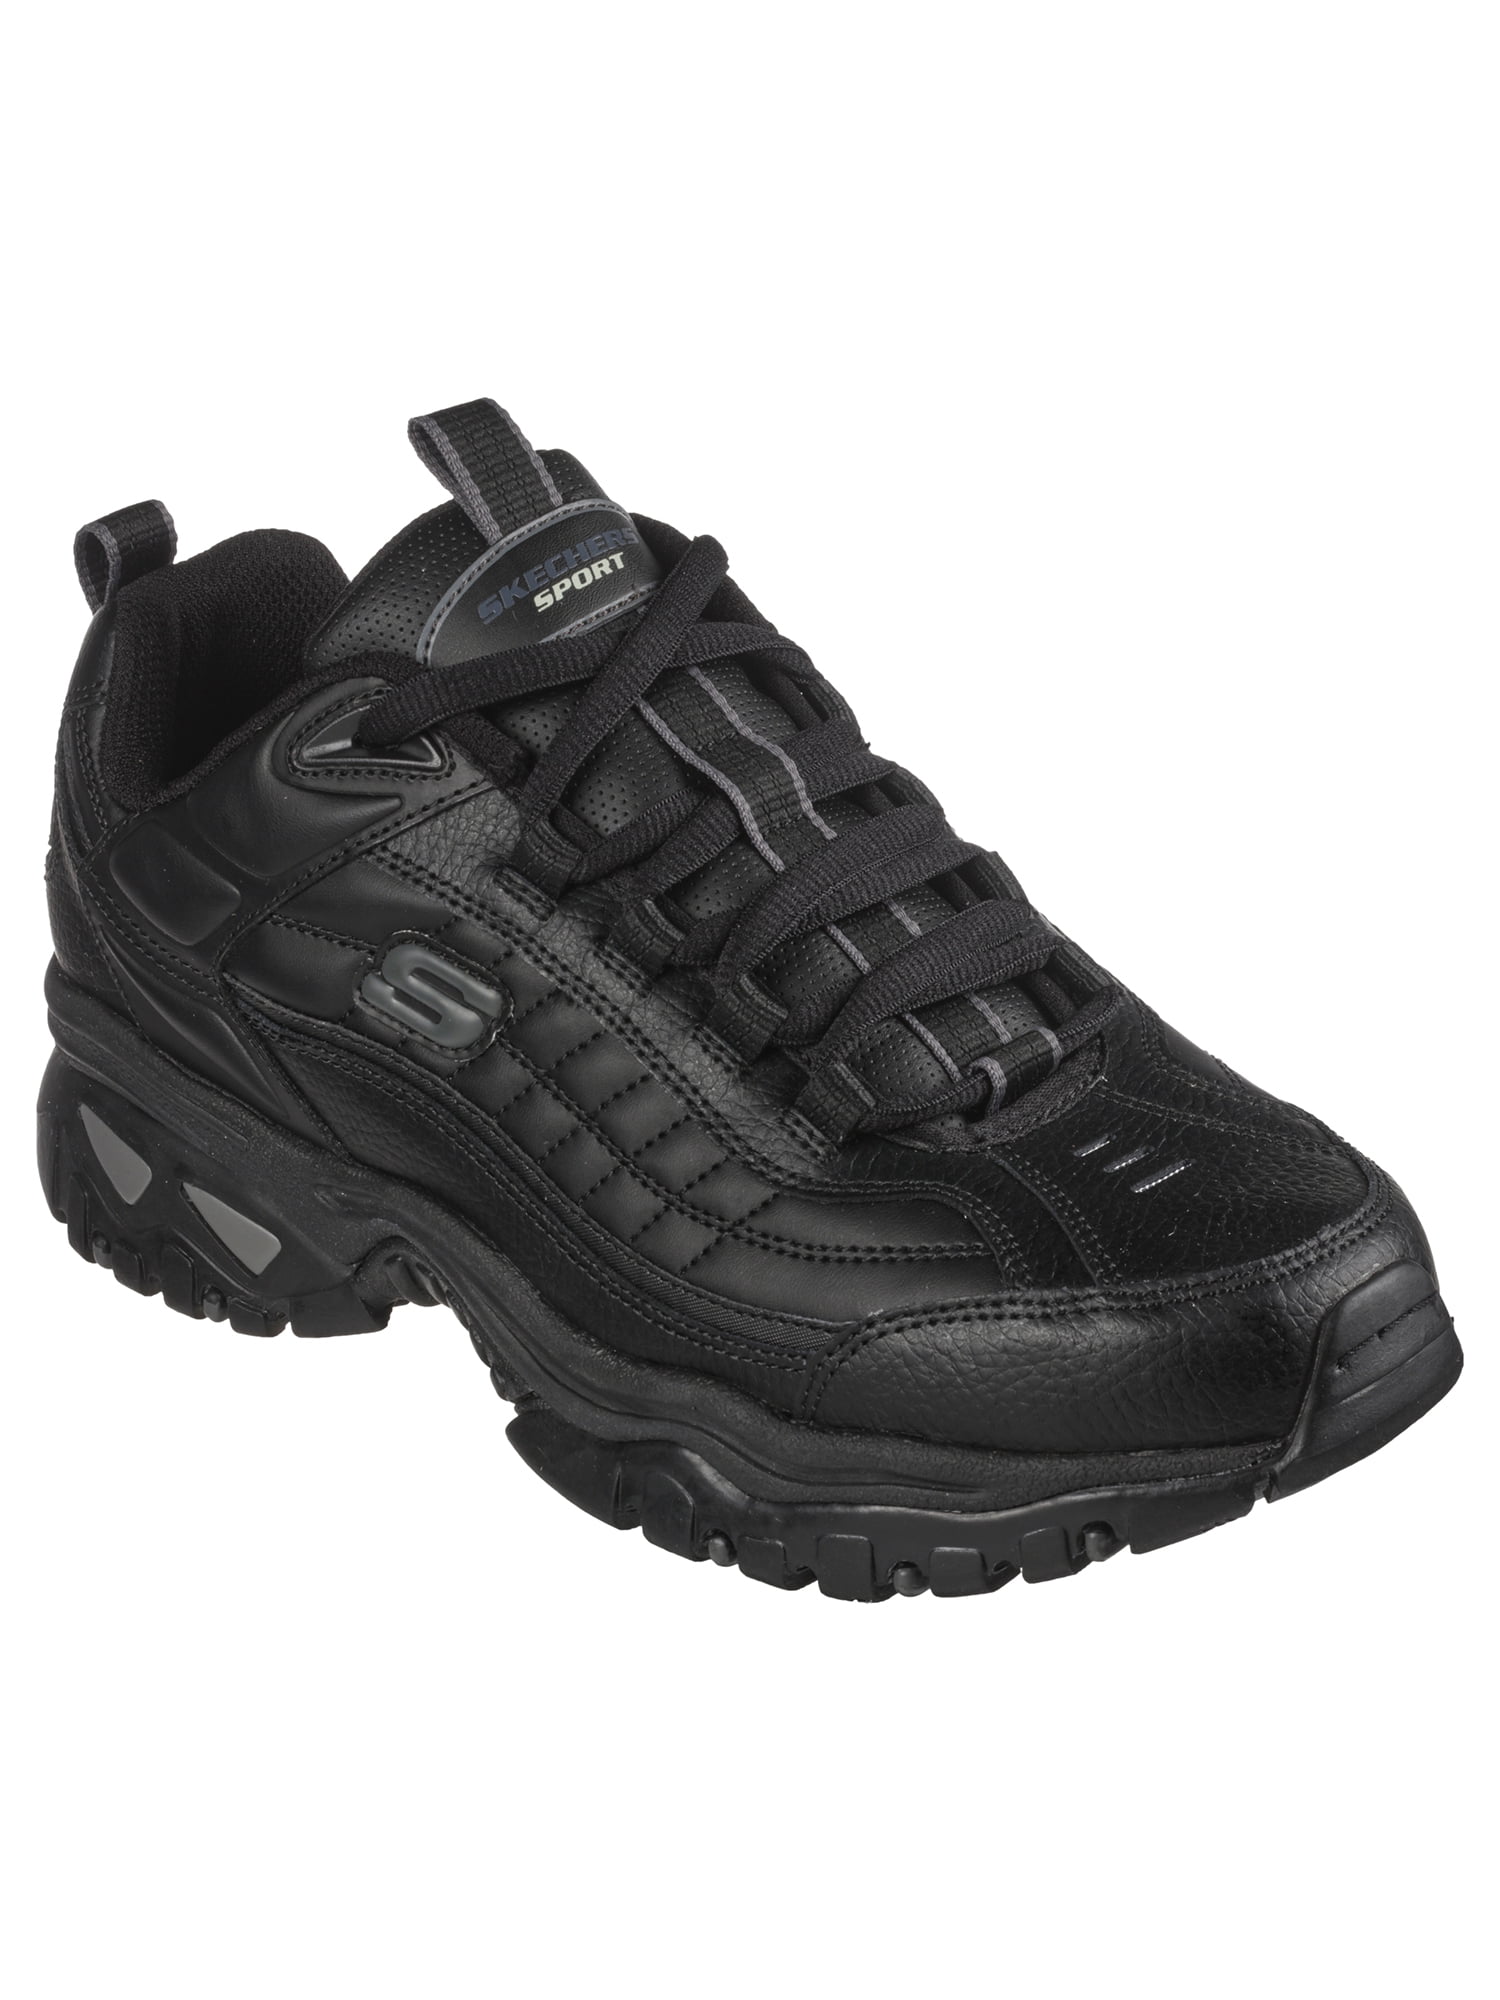 Does Walmart Sell Skechers Shoes?